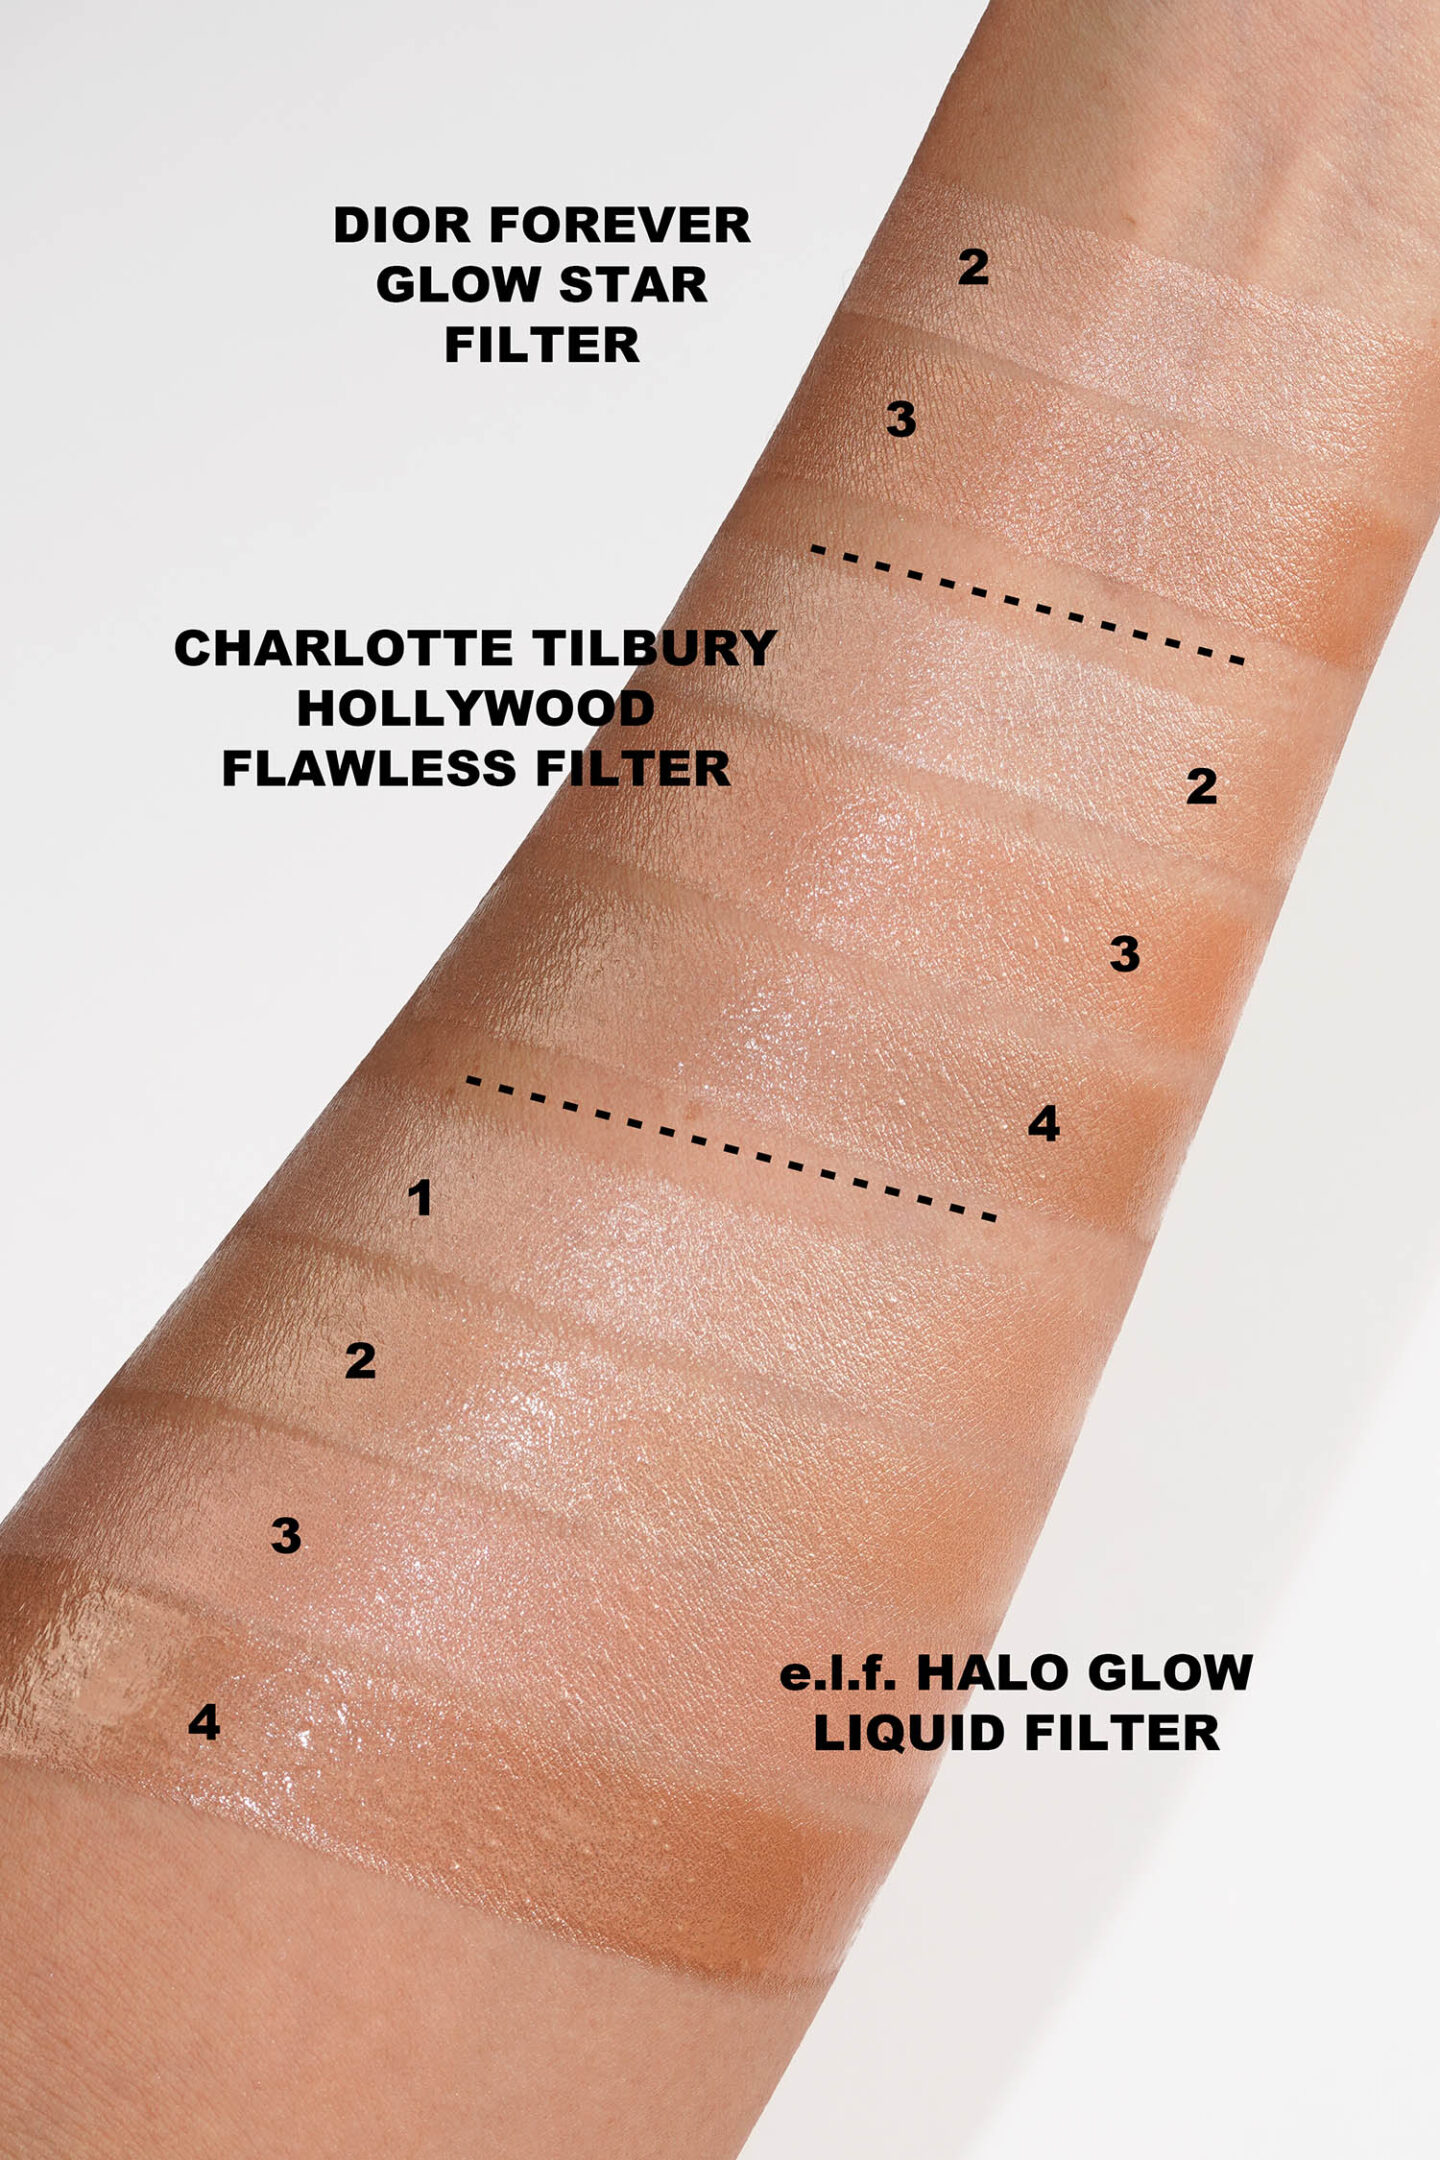 Dior Beauty Forever Glow Star Filter vs Charlotte Tilbury Hollywood Flawless Filter and elf Halo Glow Liquid Filter